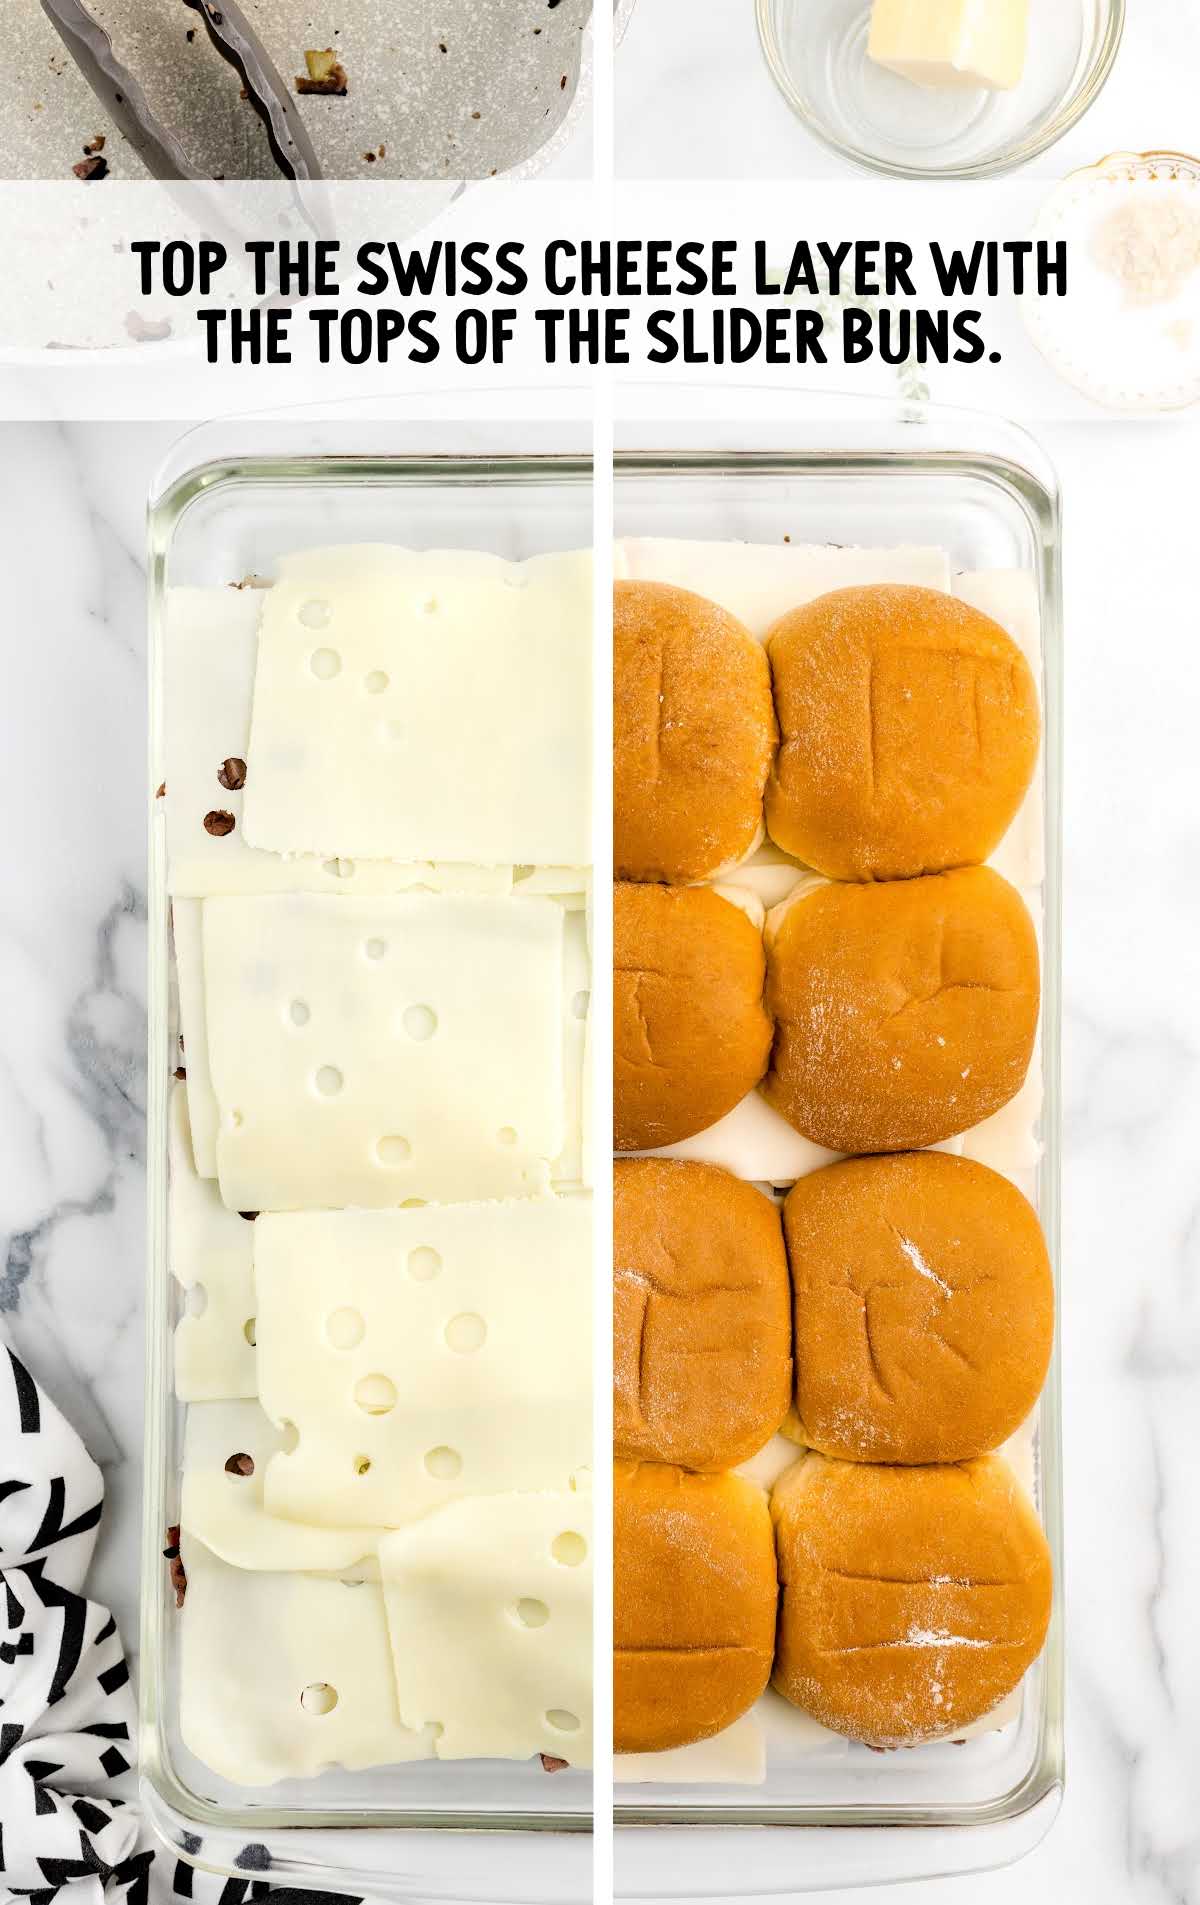 Swiss cheese layered with the tops of the slider buns